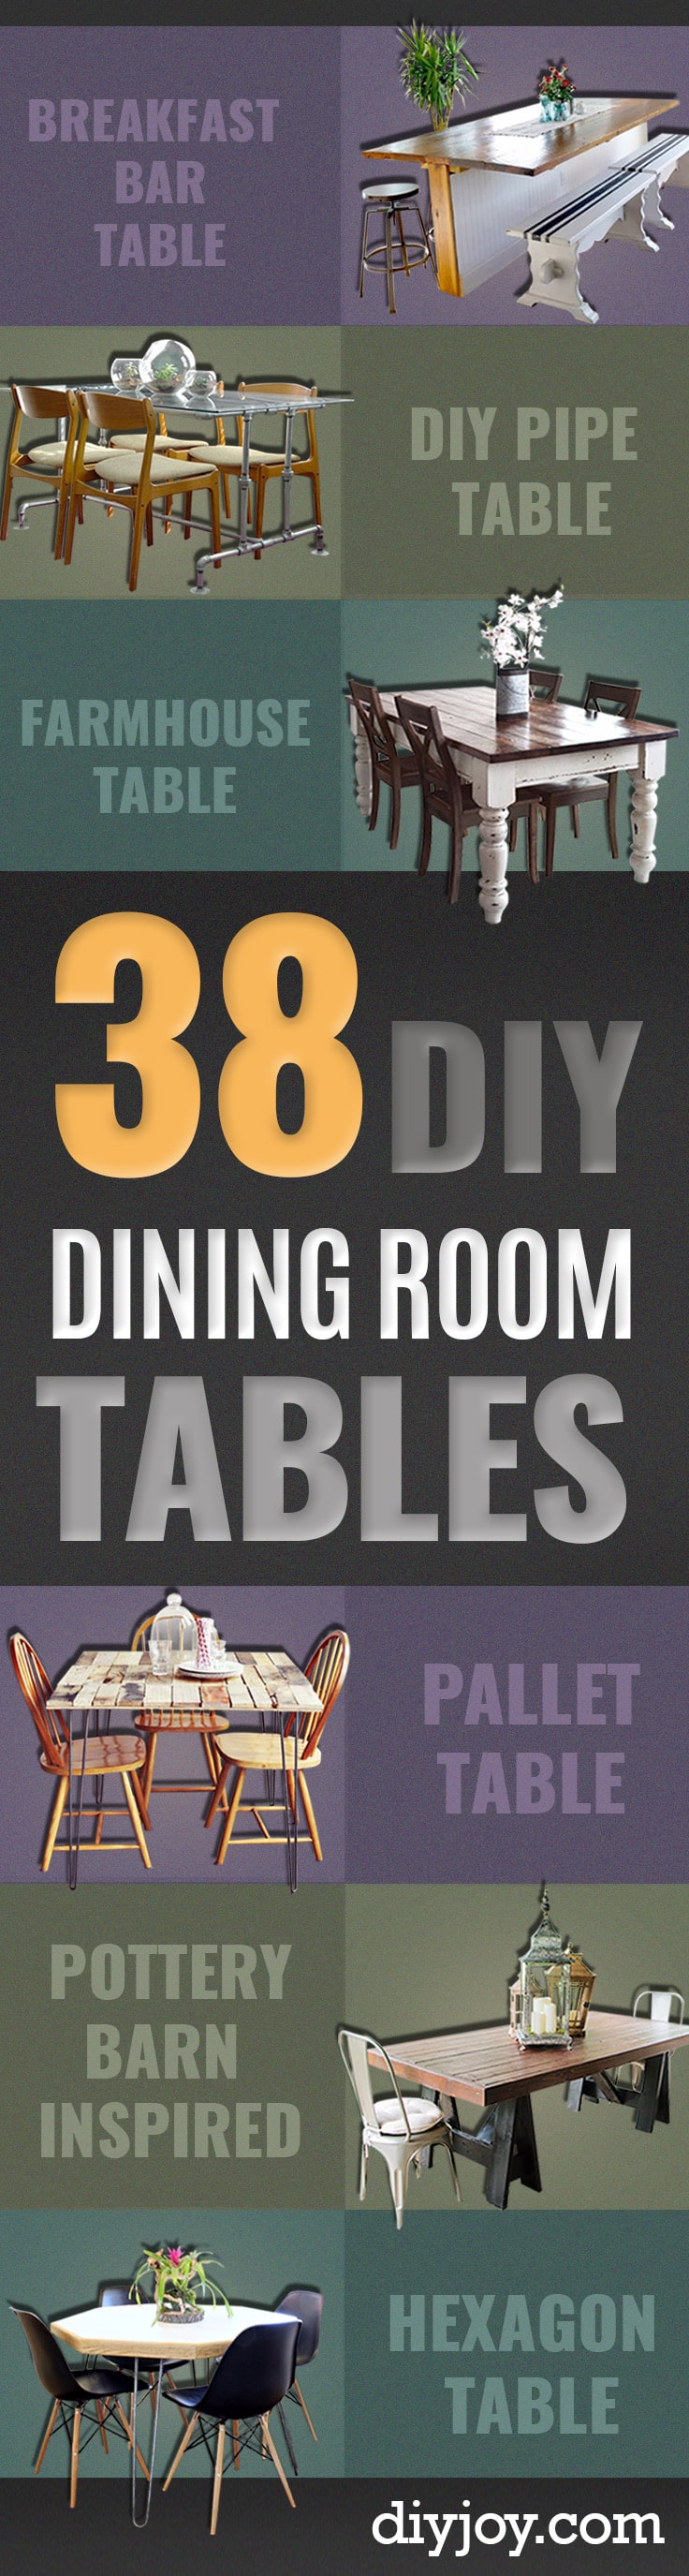 DIY Dining Room Table Projects - Creative Do It Yourself Tables and Ideas You Can Make For Your Kitchen or Dining Area. Easy Step by Step Tutorials that Are Perfect For Those On A Budget http://diyjoy.com/diy-dining-room-table-projects